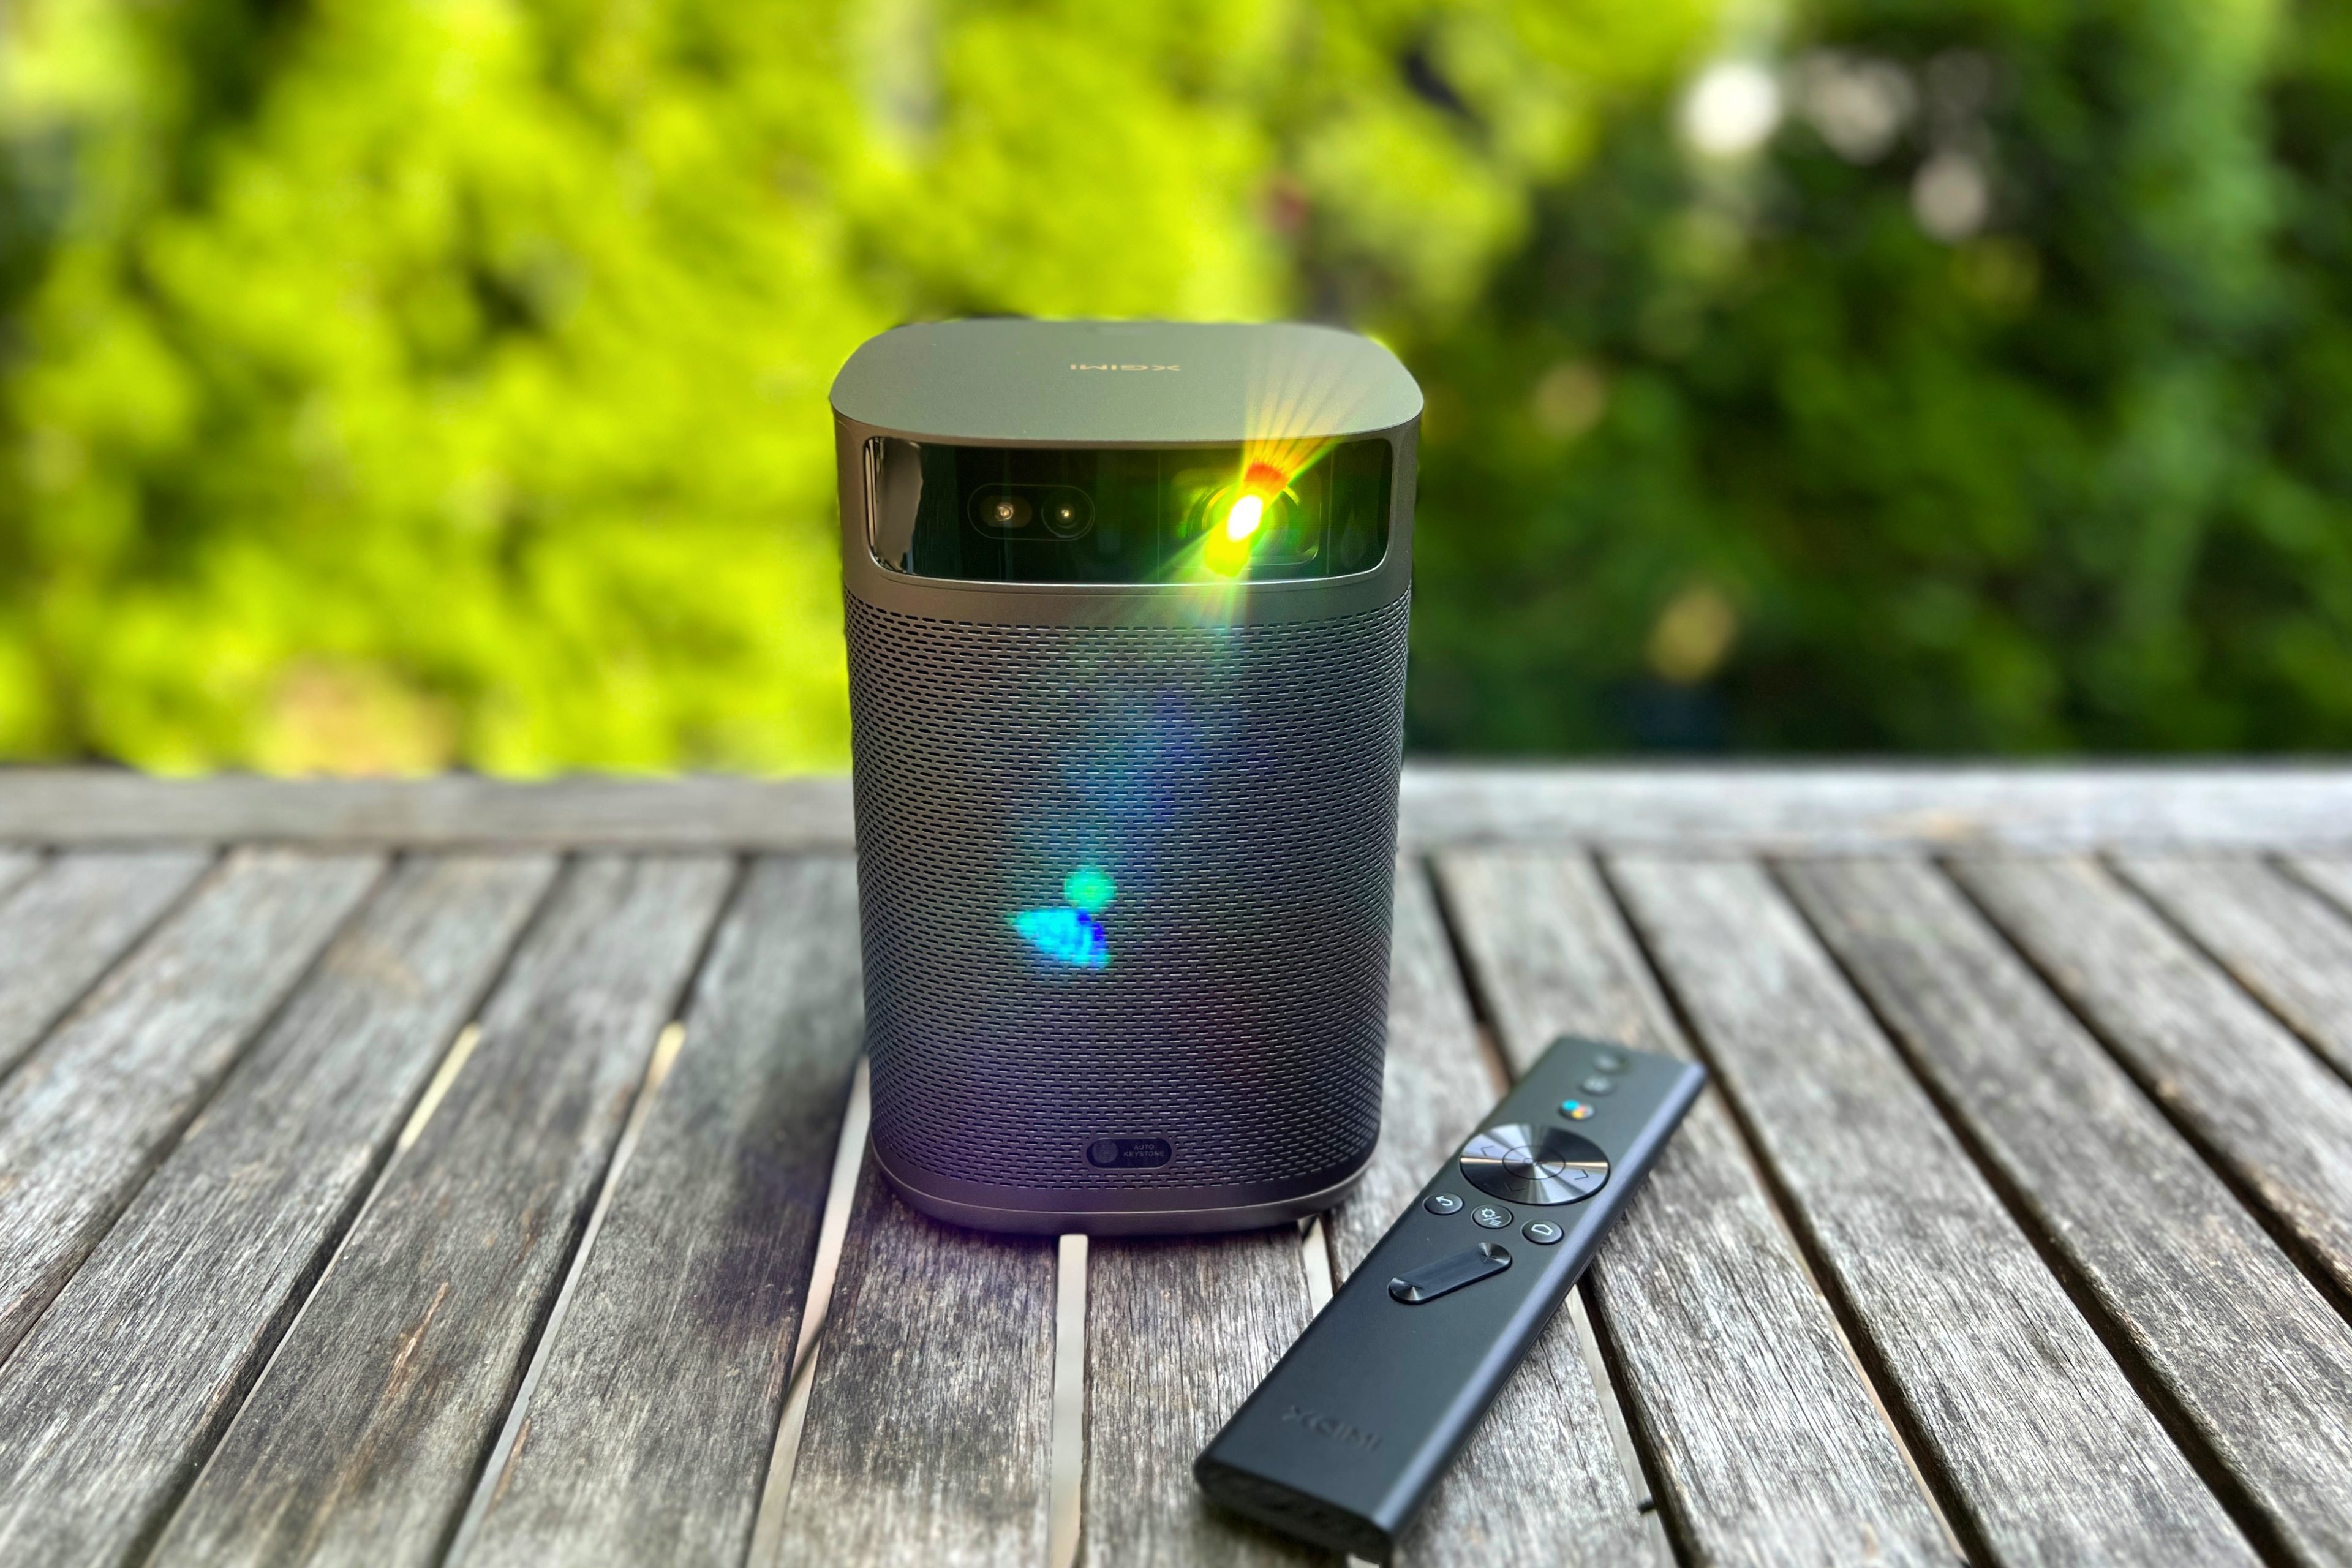 Pro Trends 2 | Android projector Xgimi TV MoGo Digital mighty, mini review: a